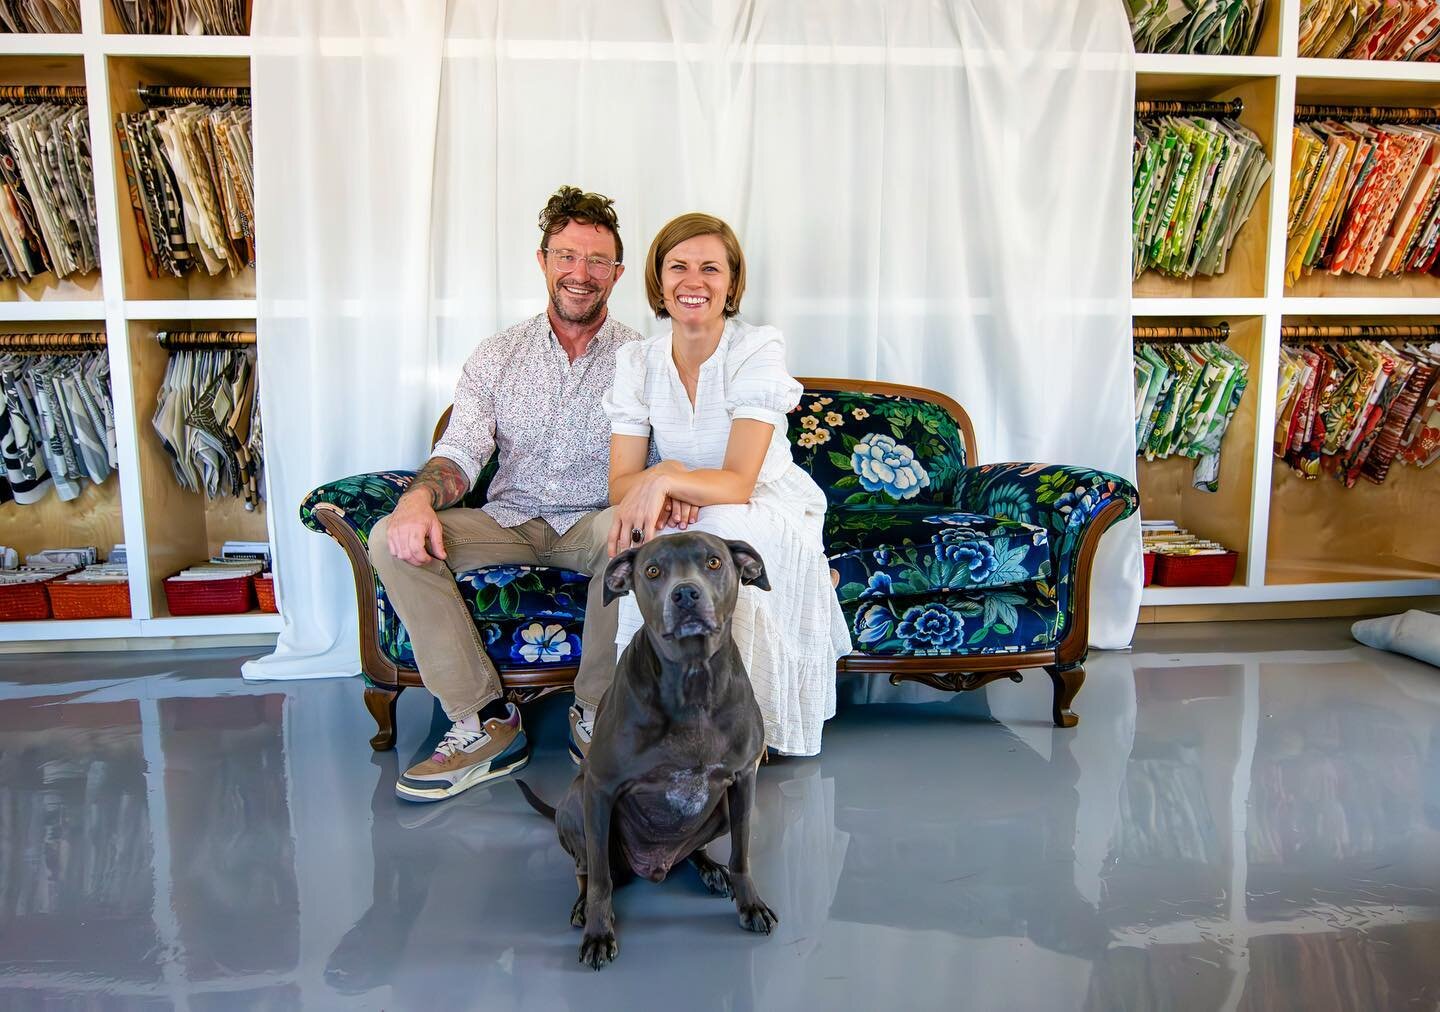 Since taking over Spruce in 2020, Erika and Clint dove right into what makes Spruce so special: Amazing, technical, and expert craftsmanship with an eye for the unique, the quirky, and stylish.
📸 Owners Erika, Clint and their Blue Lacey, Pete 
@spru